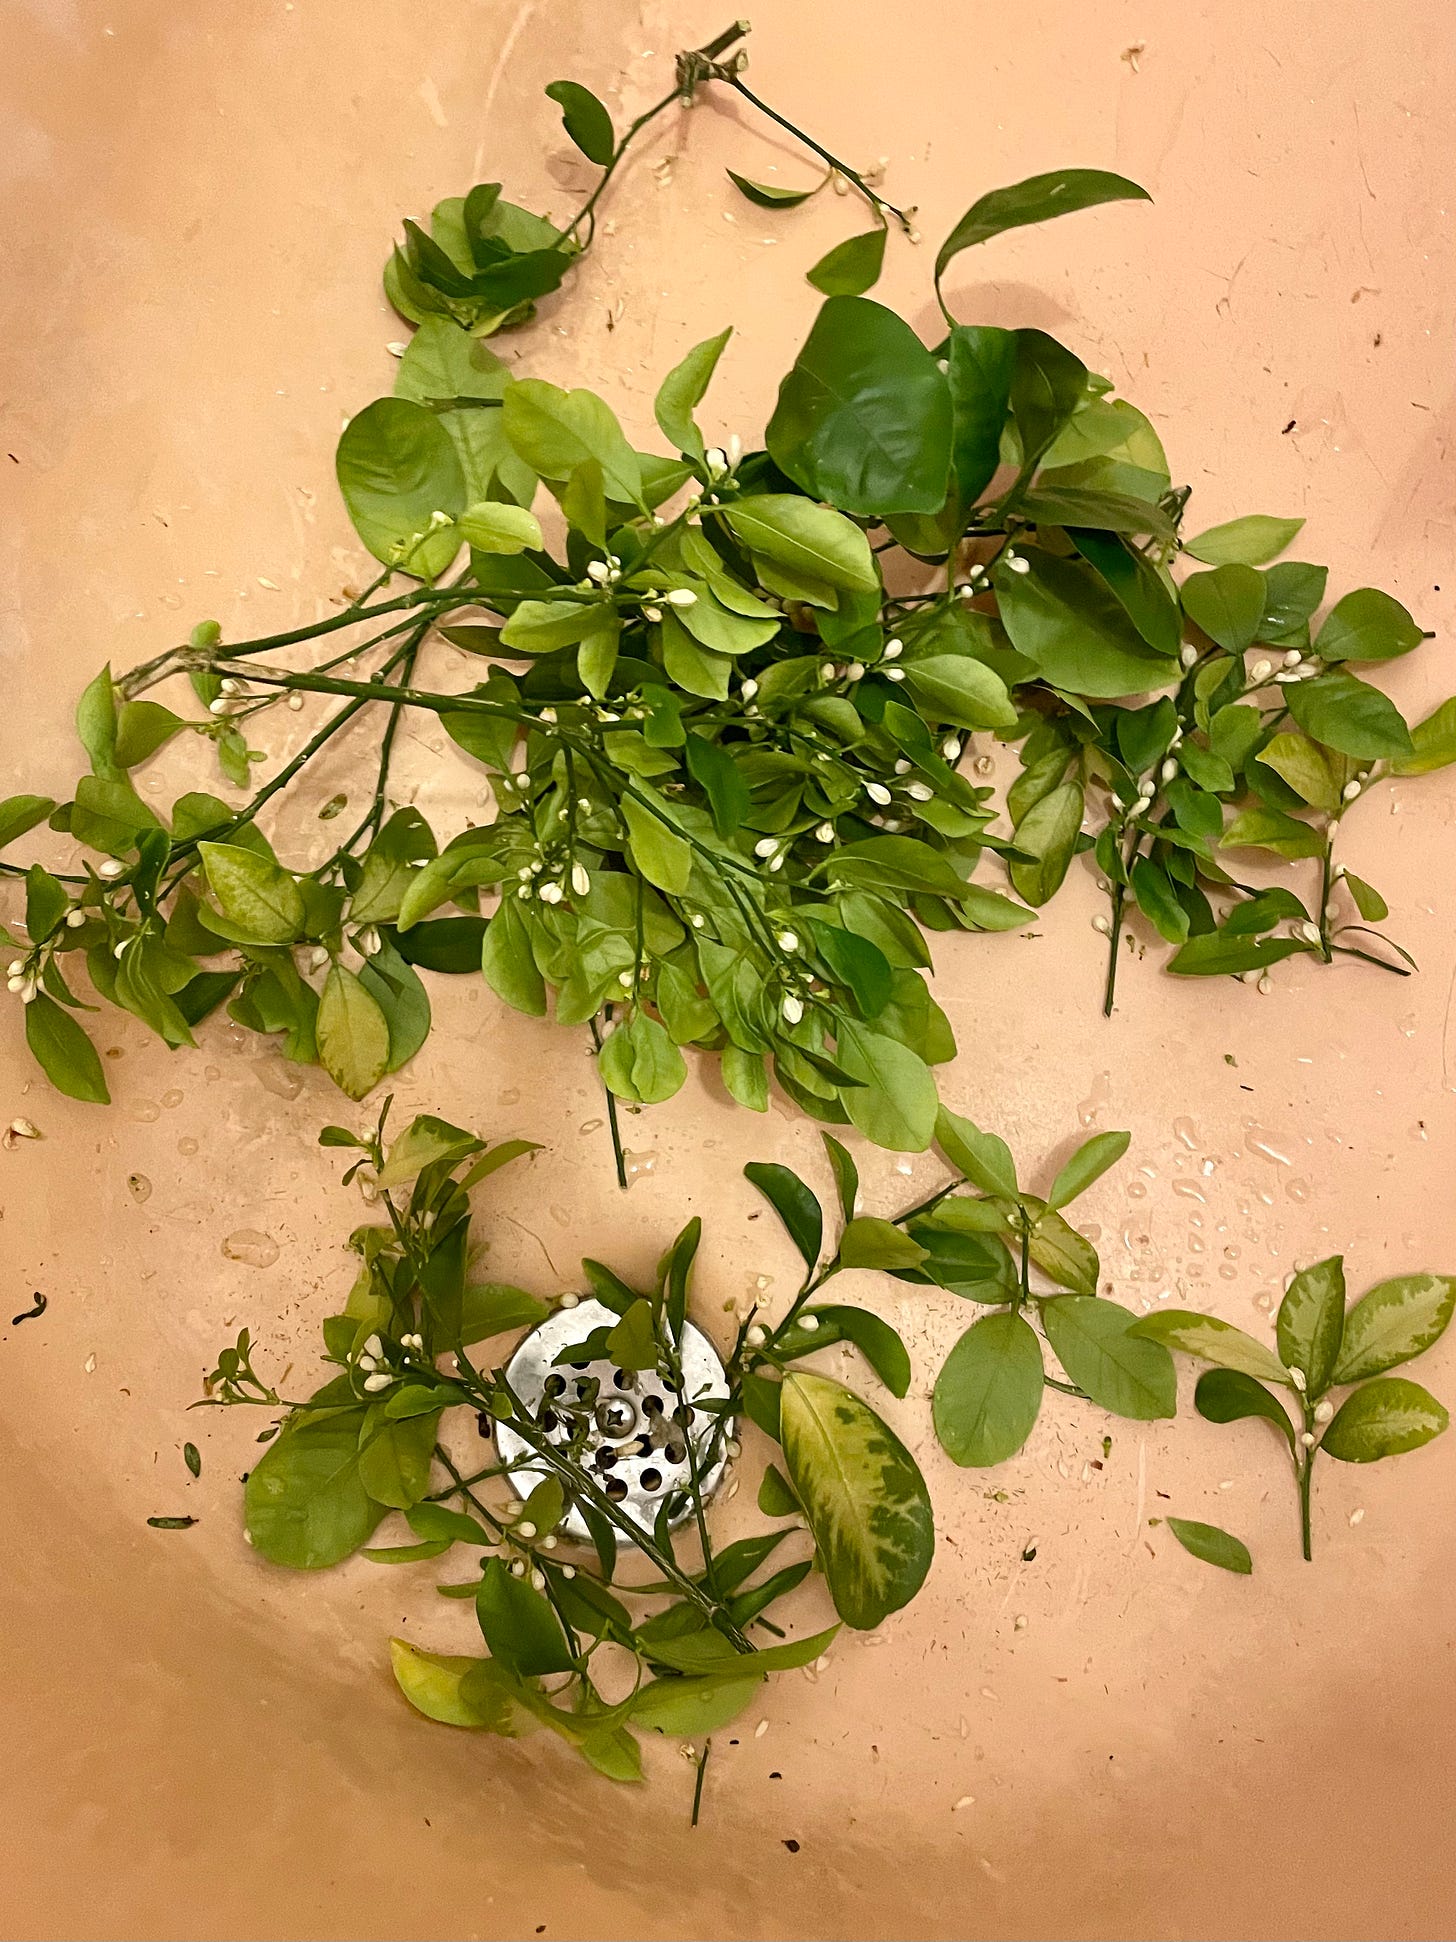 ID: Photo of chopped branches full of flower buds on the floor of my salmon pink bathtub.